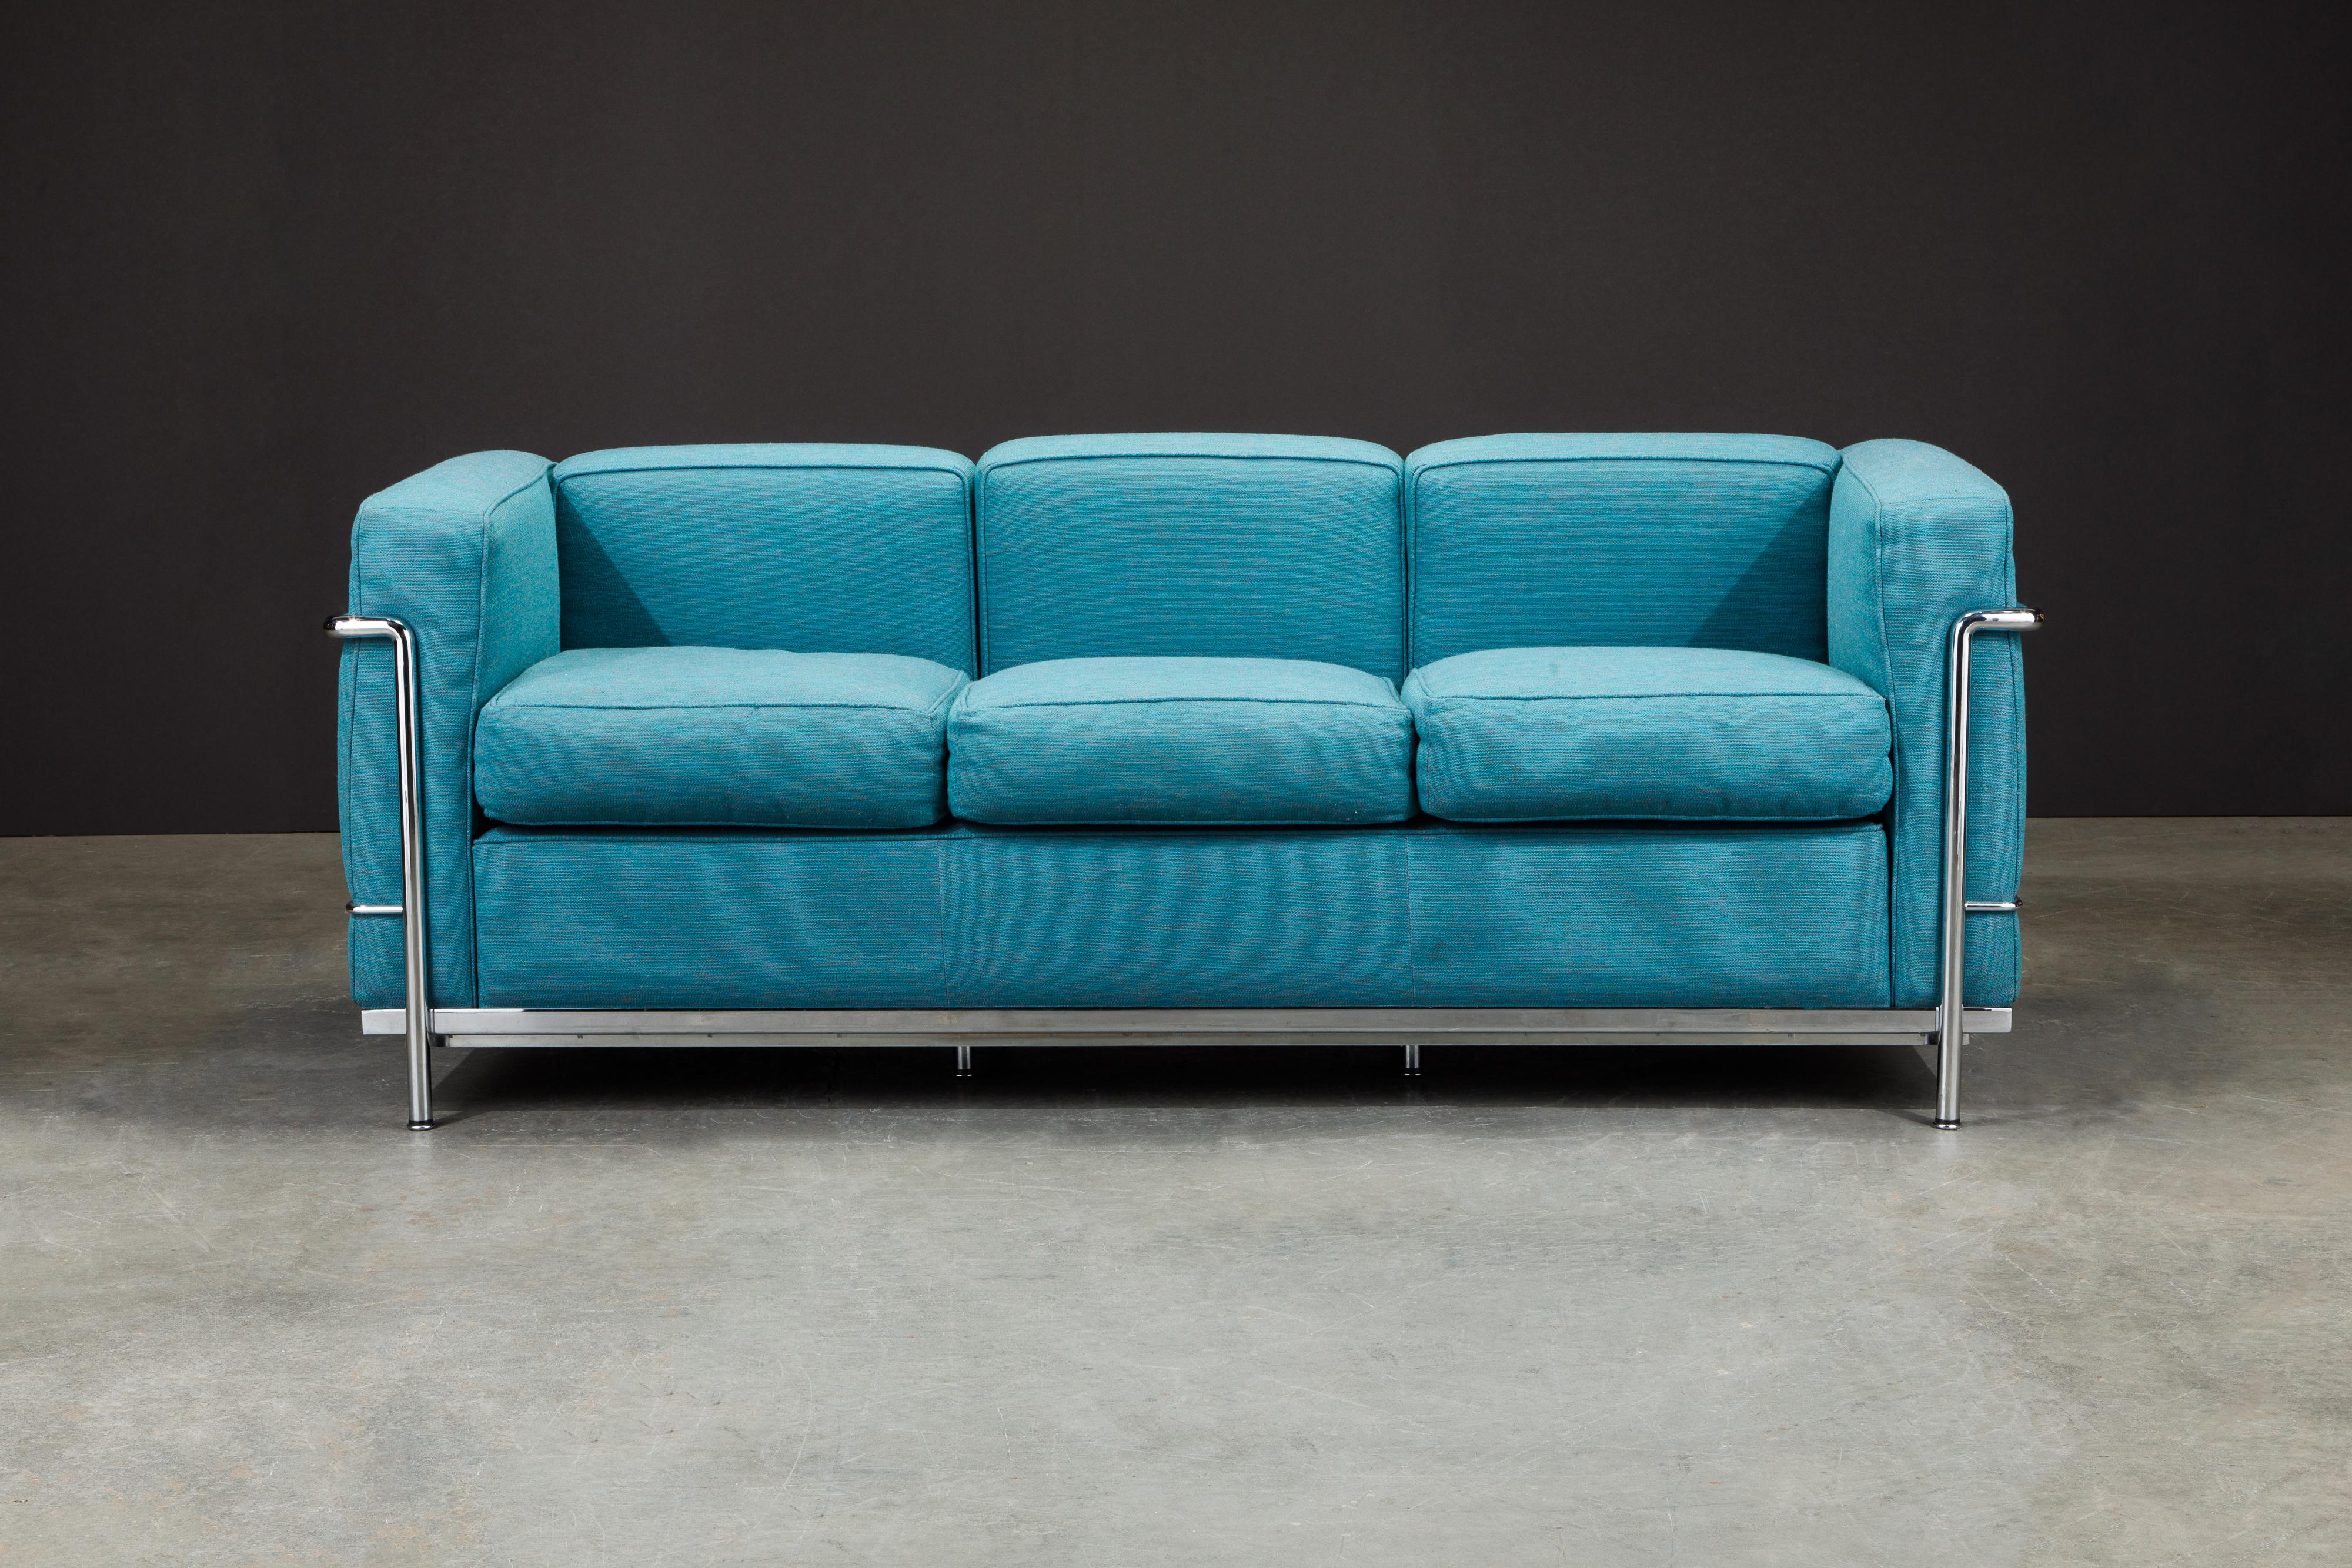 An incredibly comfortable Le Corbusier for Cassina (authentic signed) LC2 three-seat sofa with teal blue fabric cushions and tubular chrome frame. 

The LC2 was designed in 1928 by Le Corbusier; his cousin and colleague Pierre Jeanneret; and